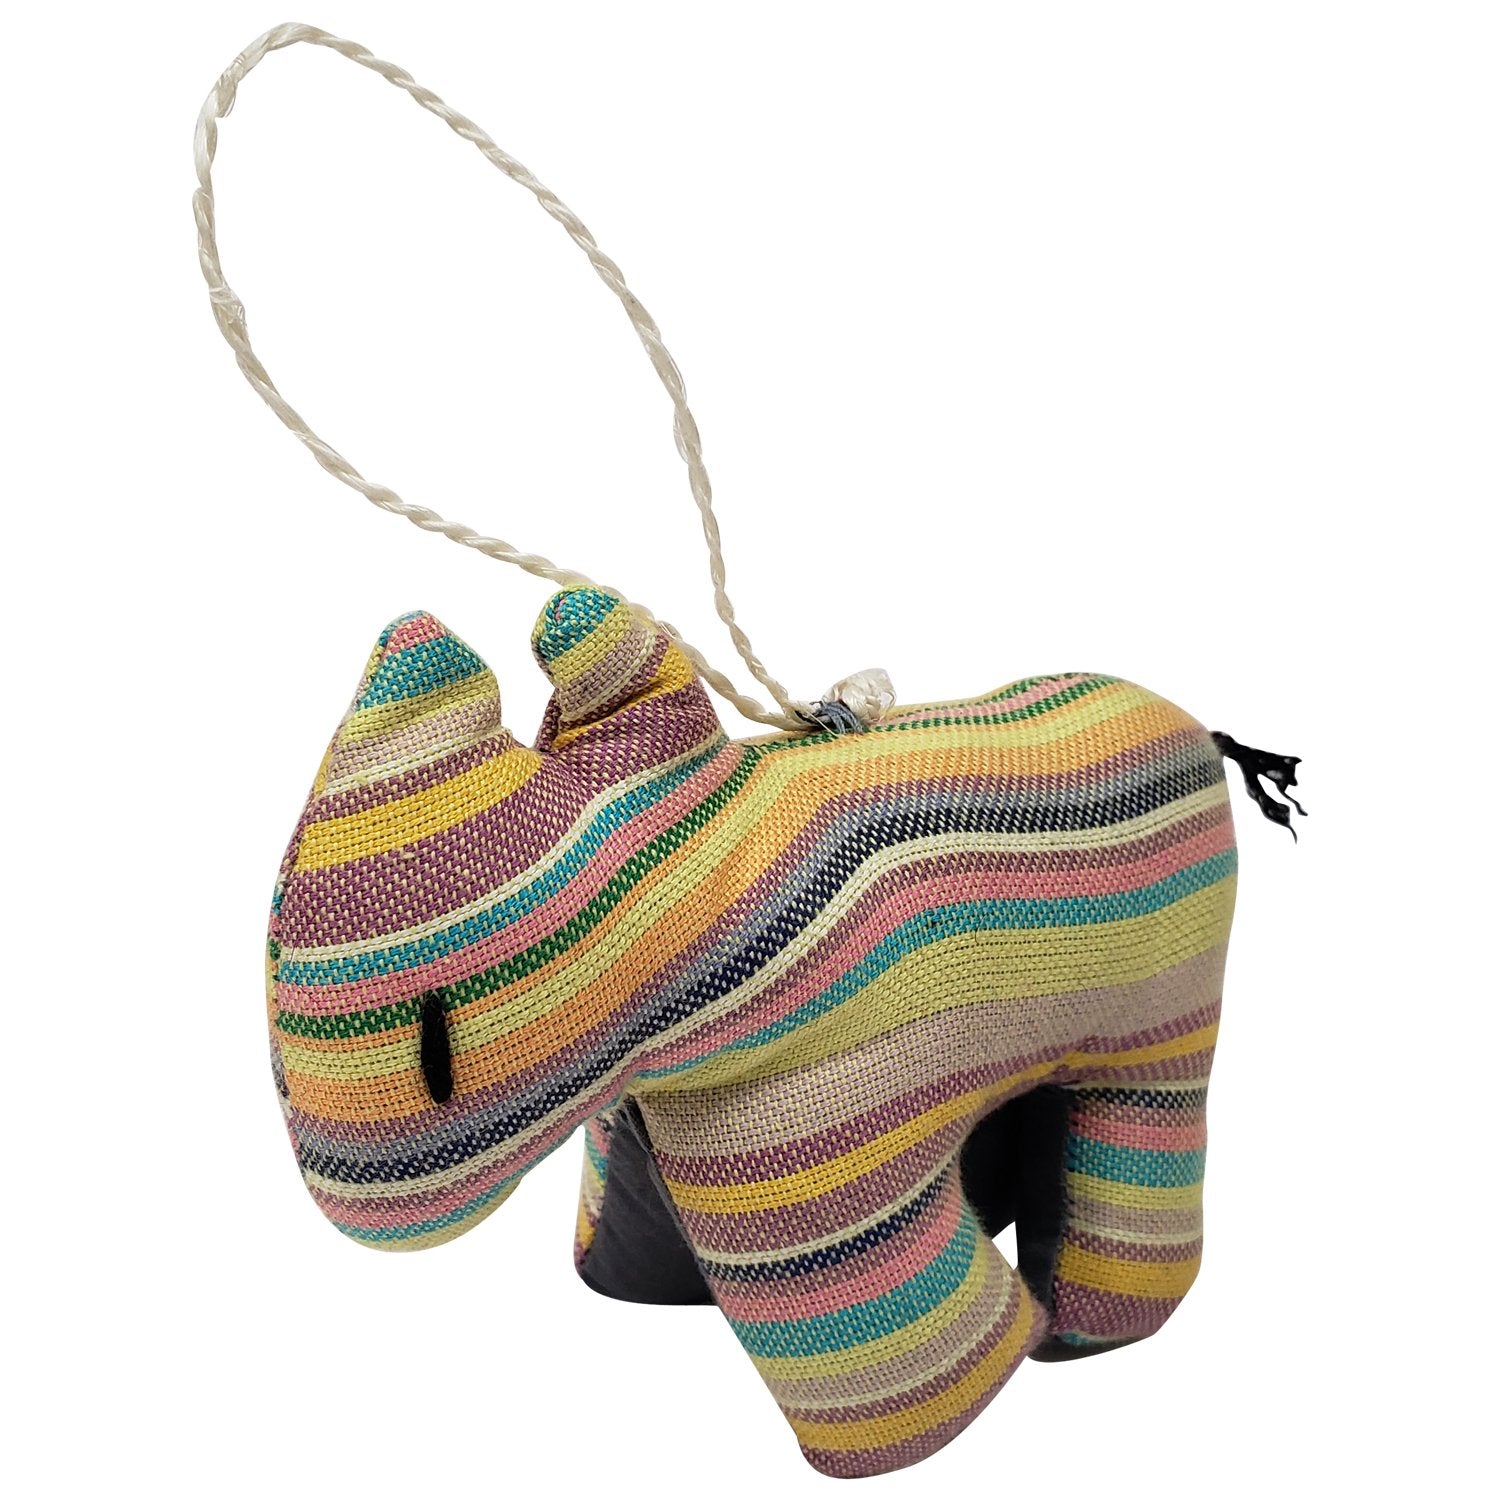 2 of 2: Rhino: Authentic Hand Made African Stuffed Animal Christmas Ornament (4.5 inches)